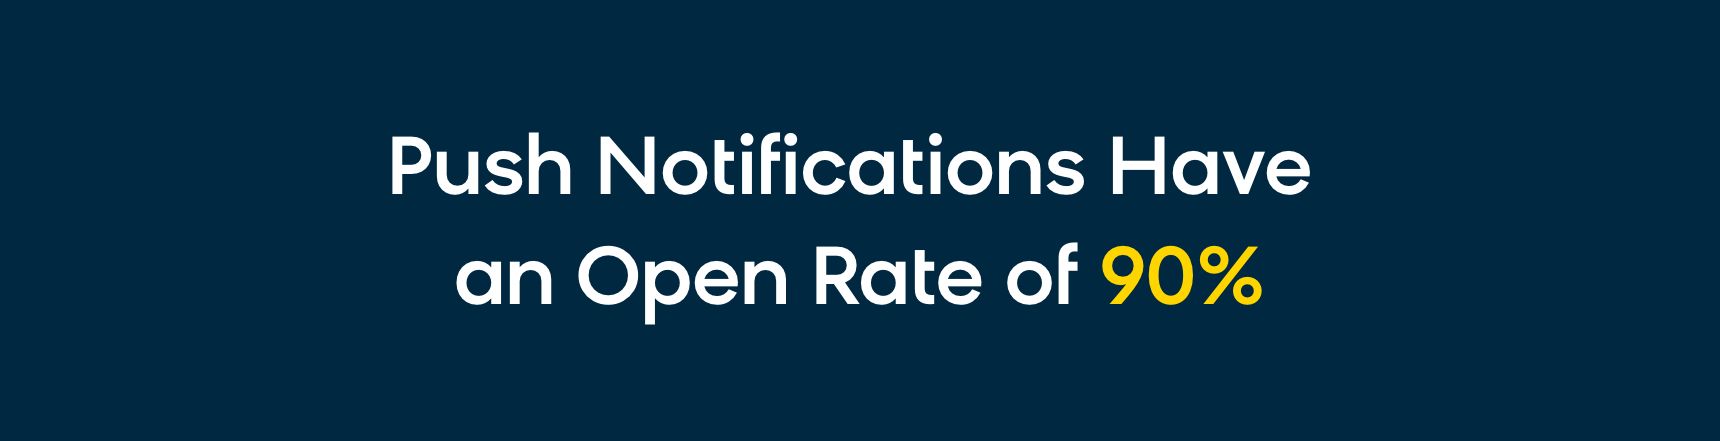 Mobile Push Notifications Have an Open Rate of 90%